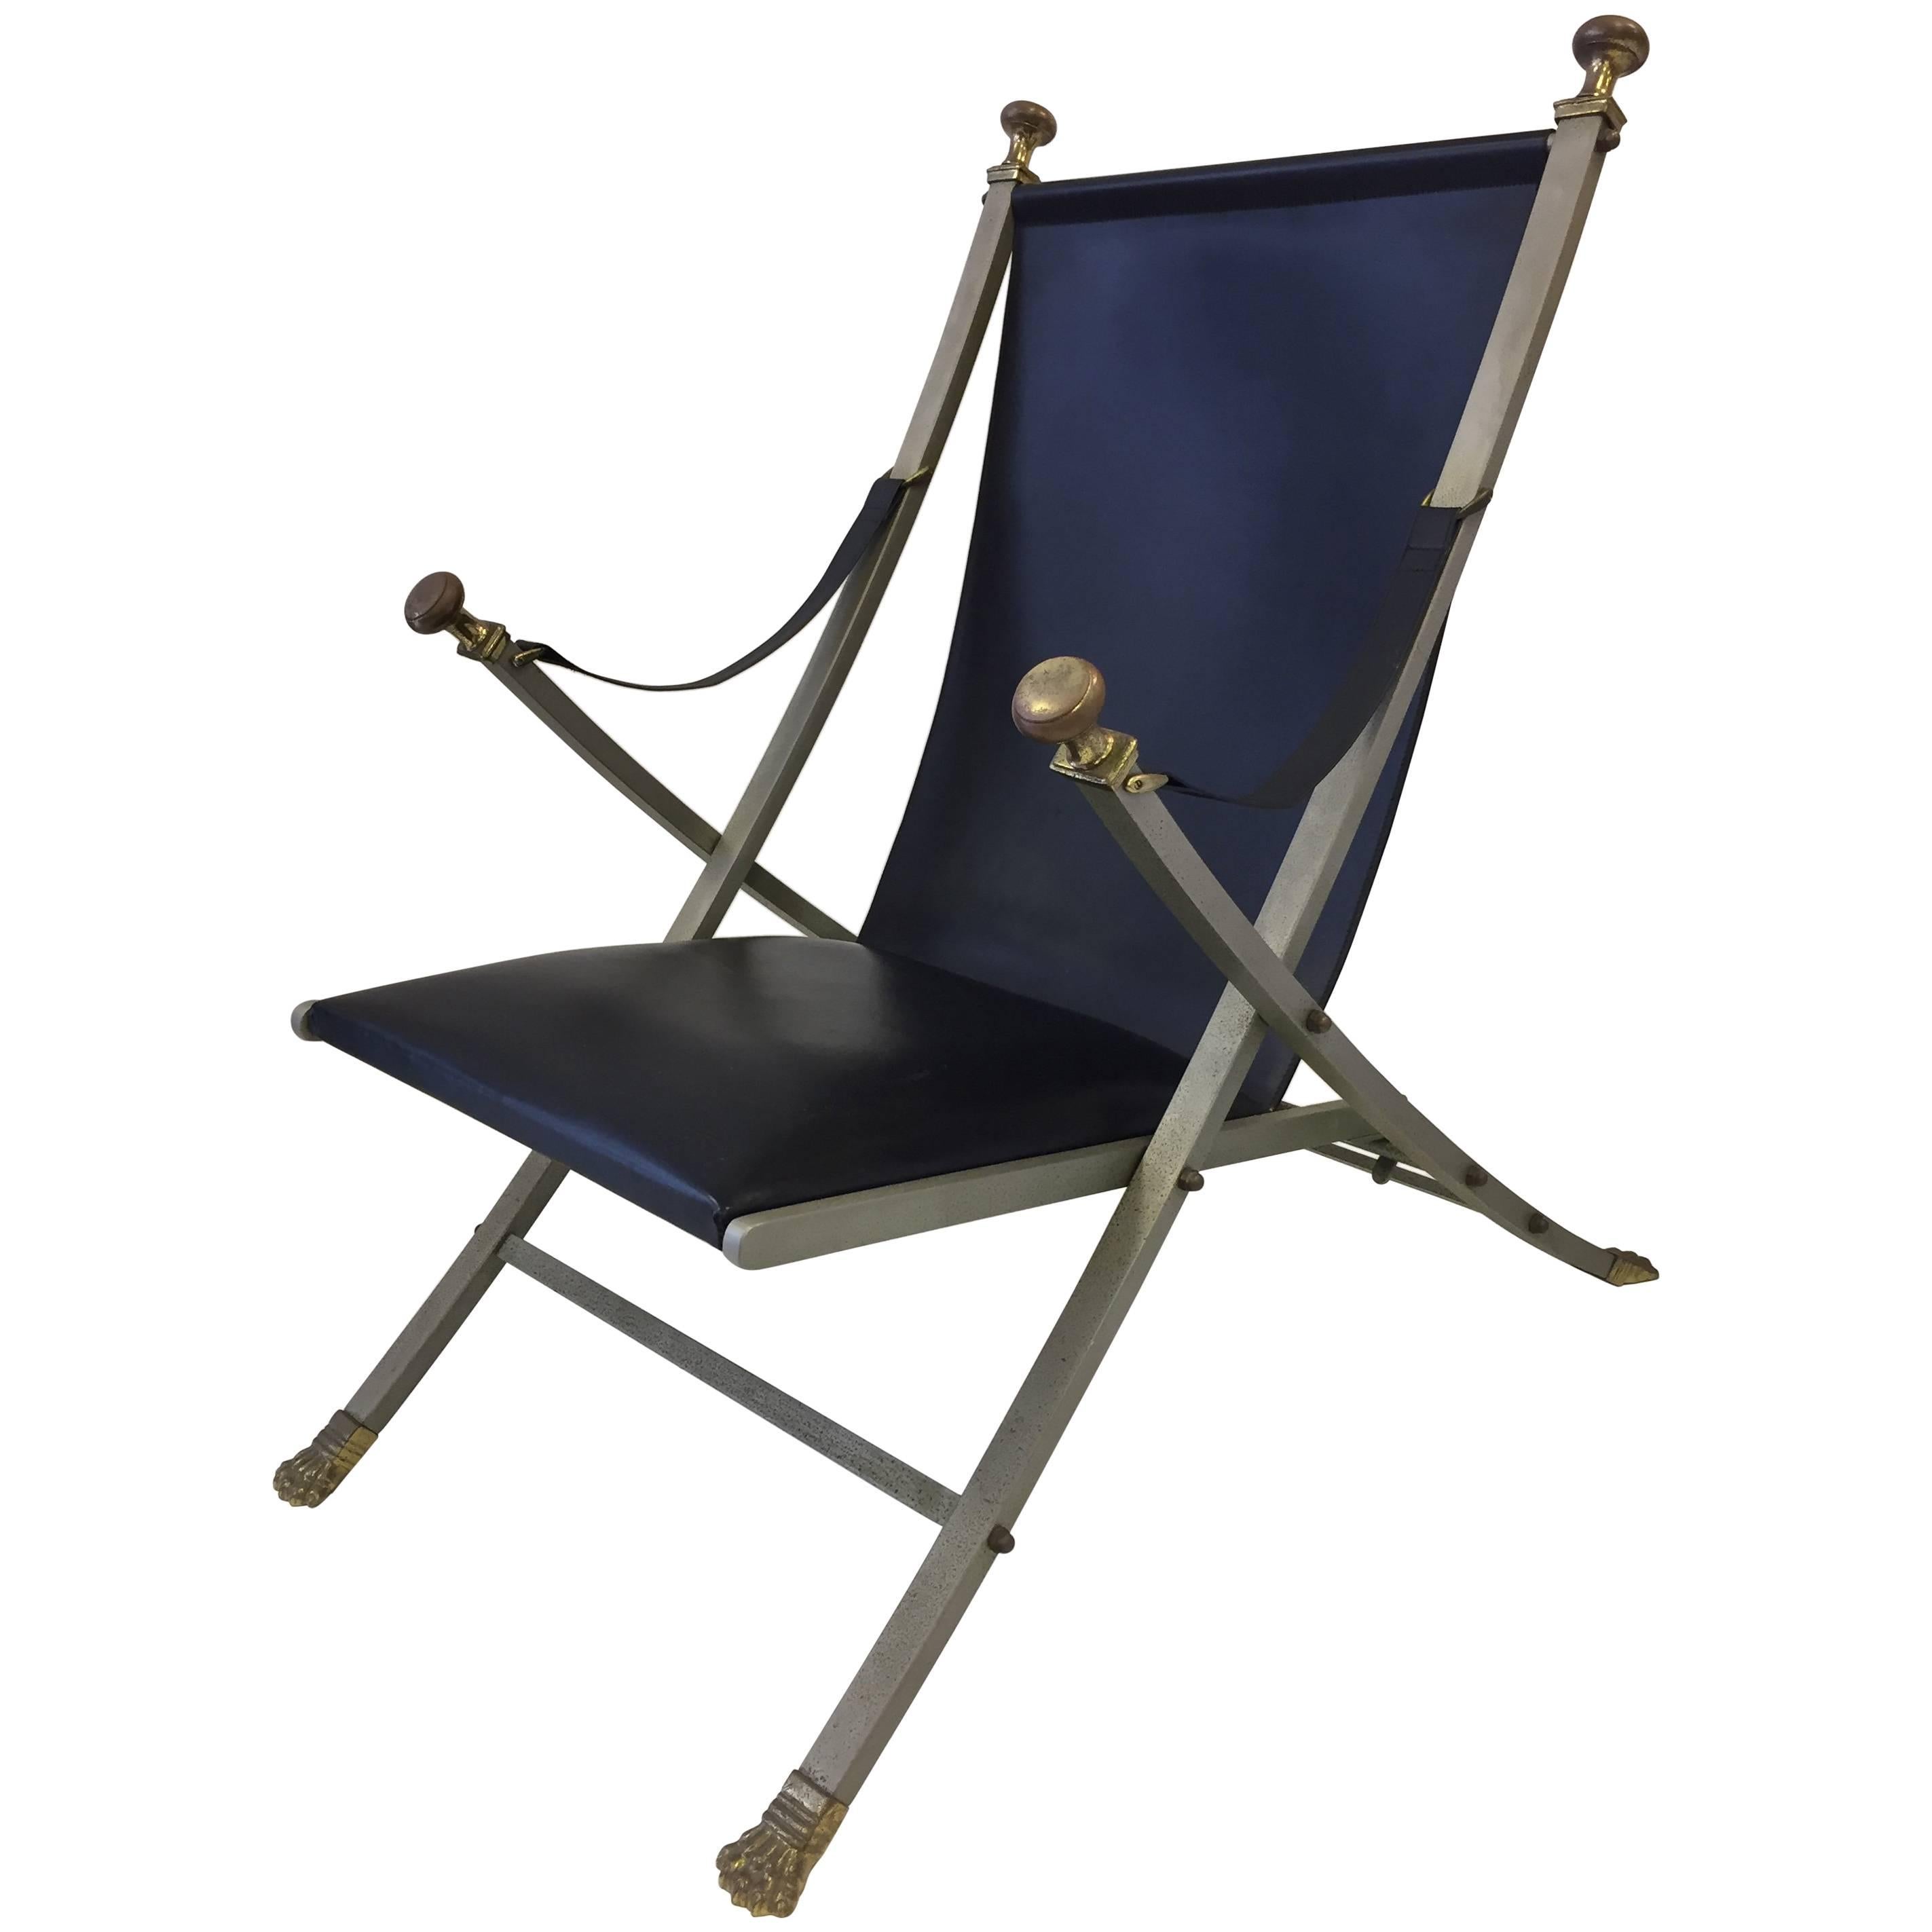 Maison Jansen Steel, Bronze and Leather Campaign Chair